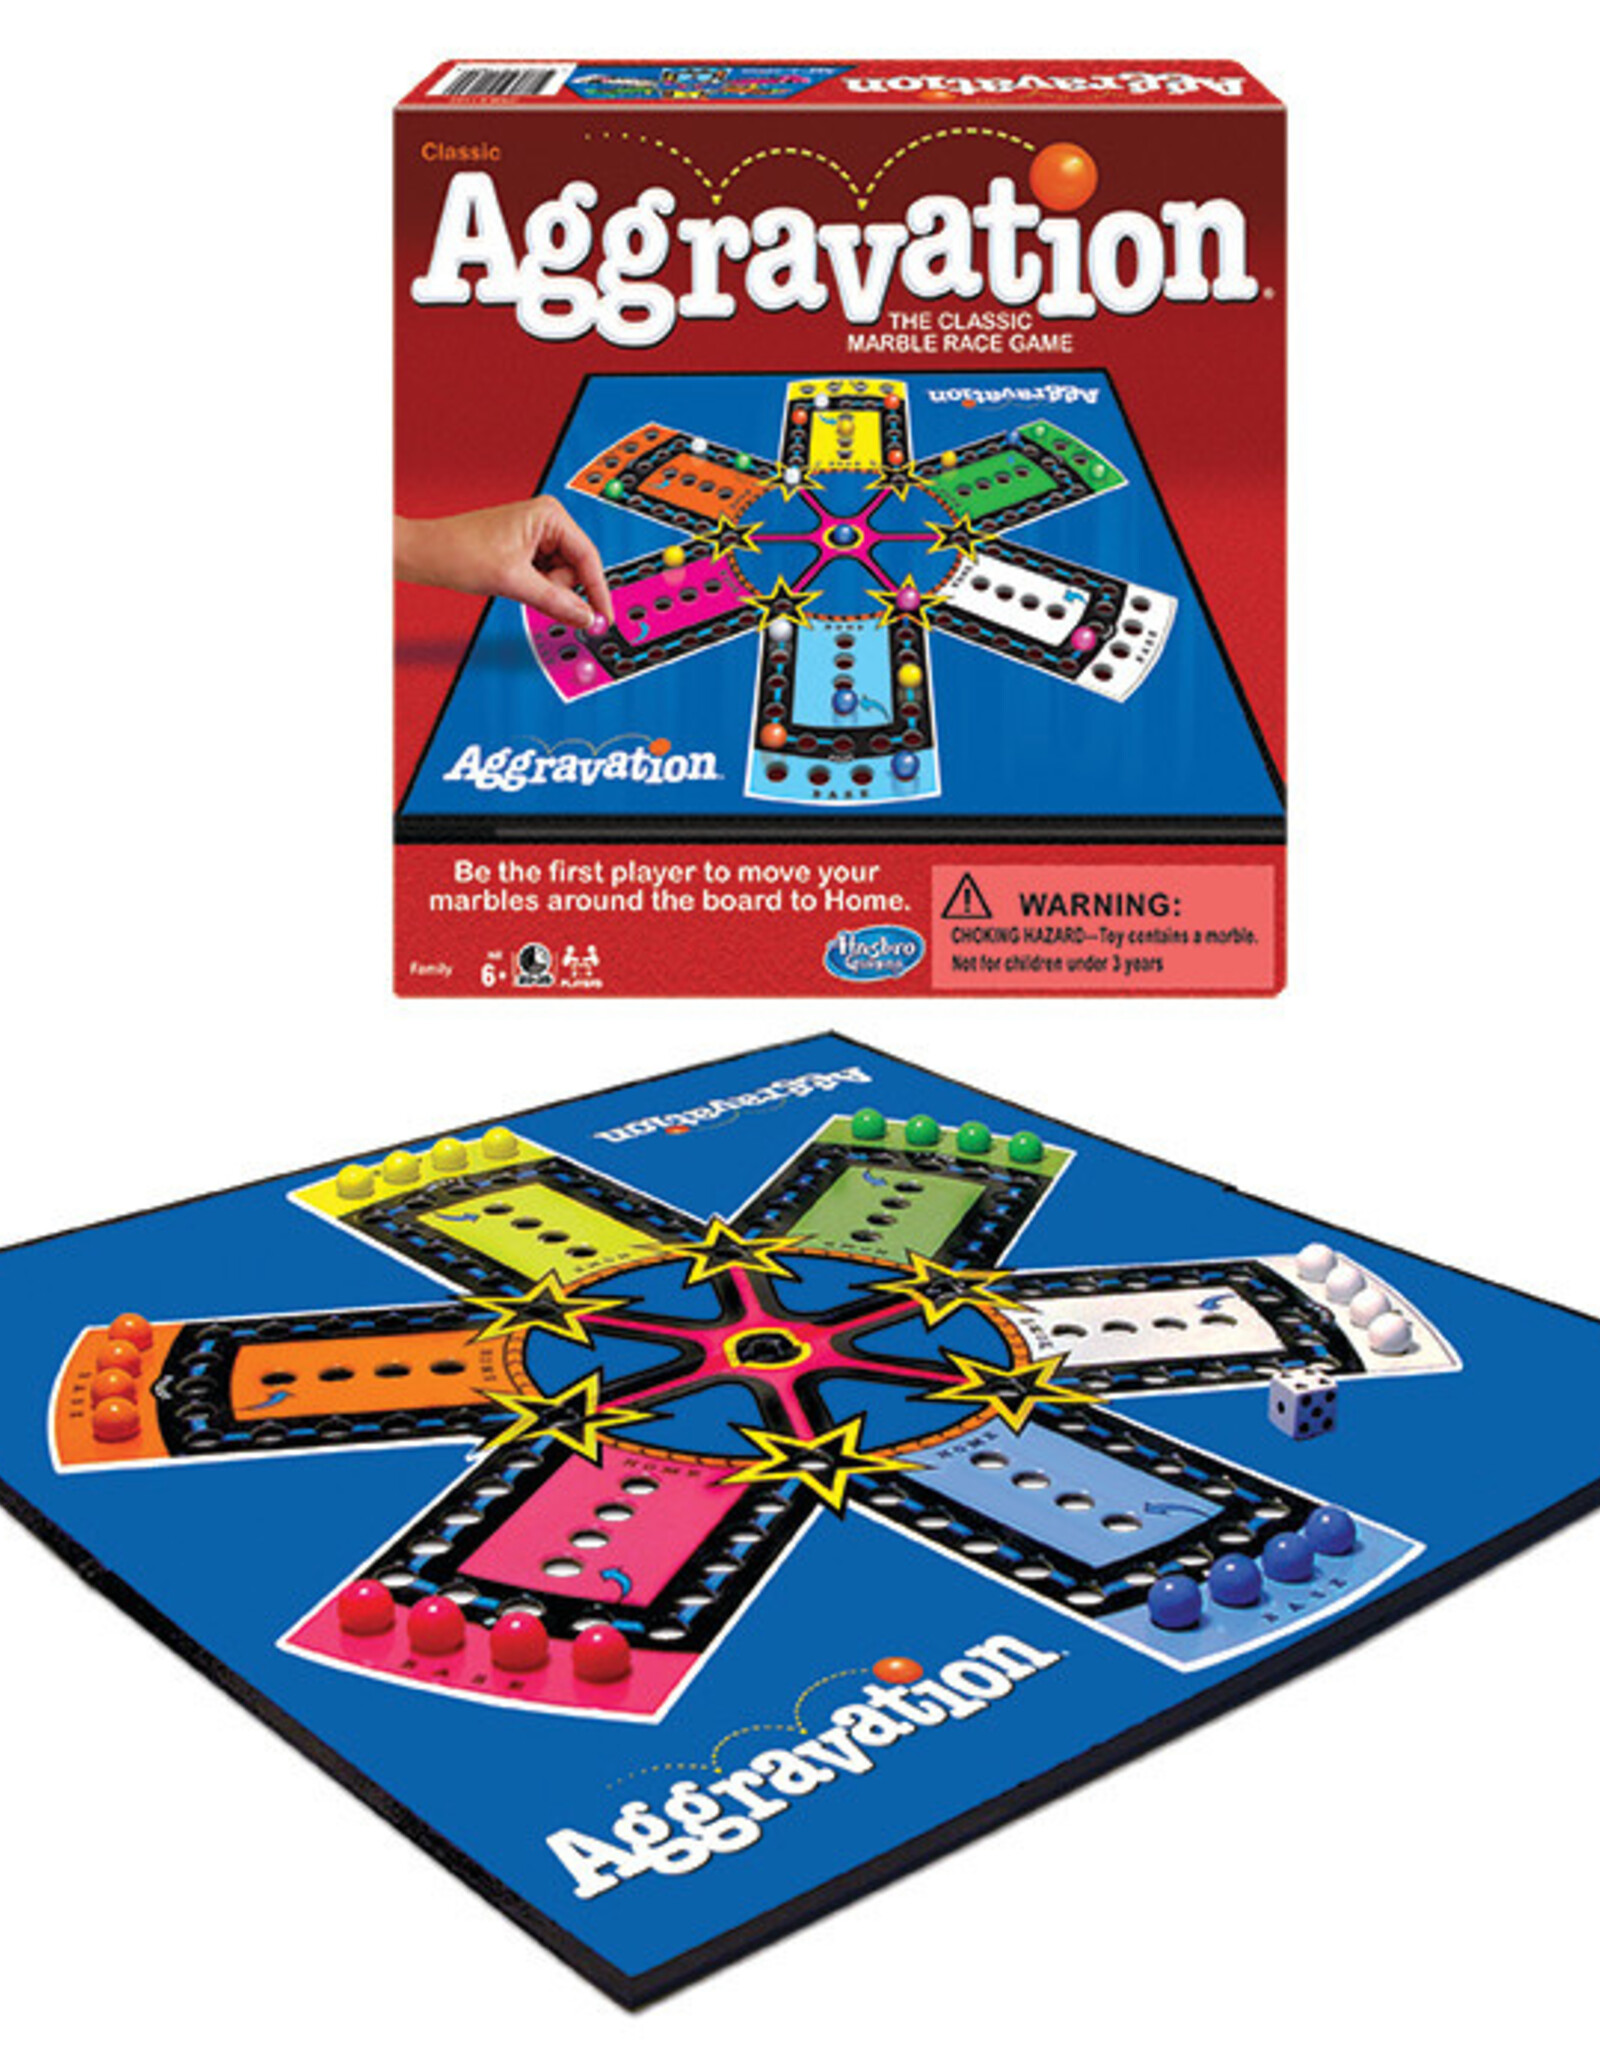 WINNING MOVES GAMES AGGRAVATION